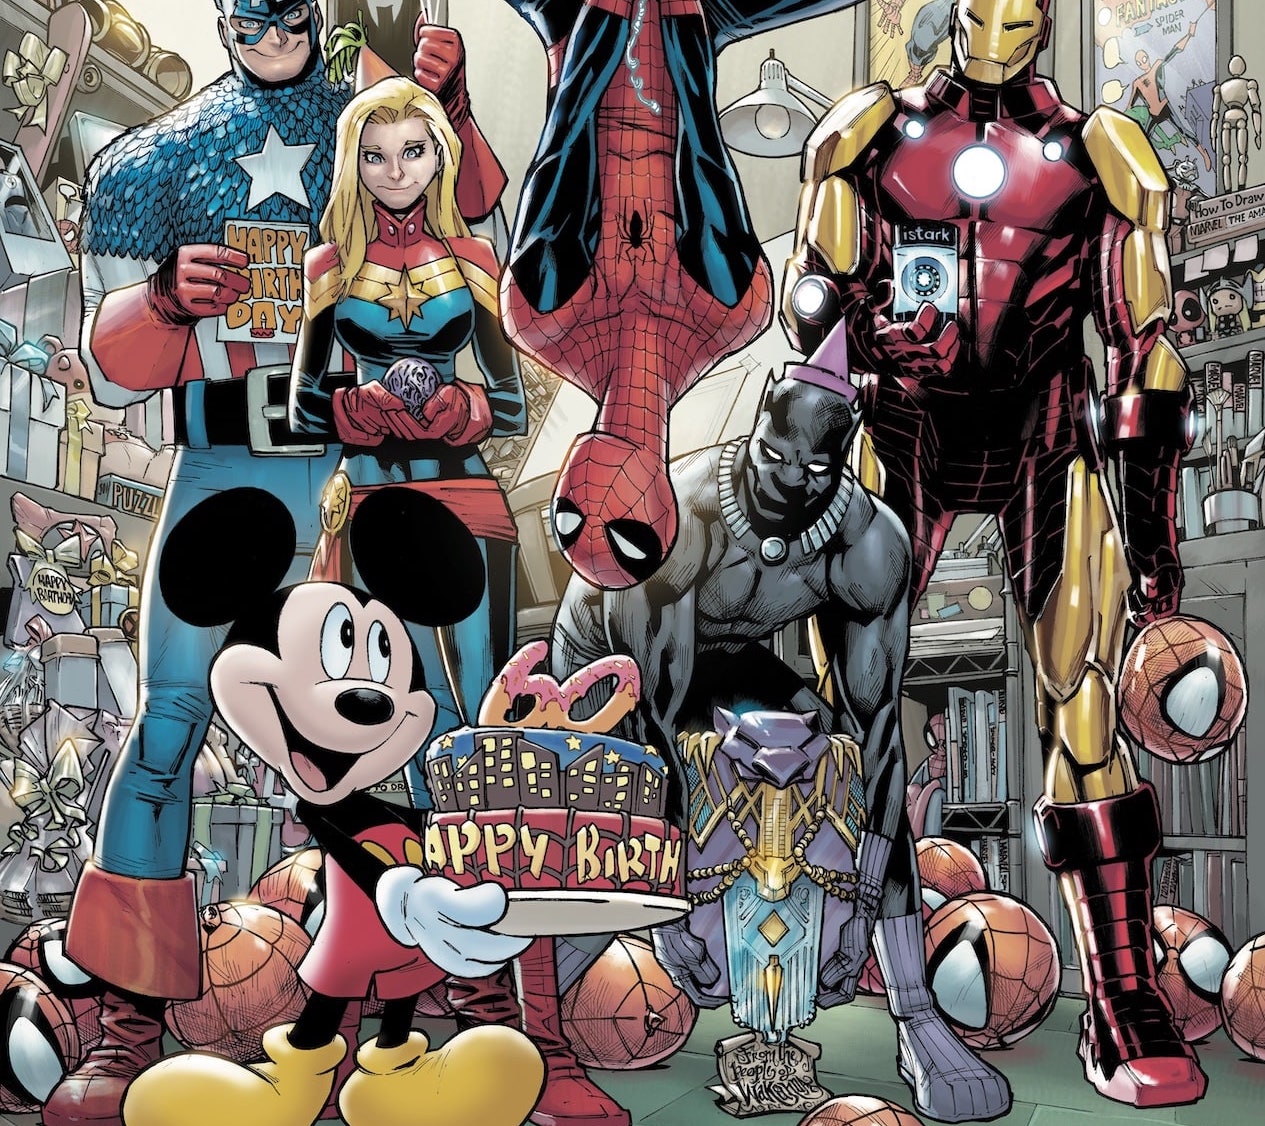 Spider-Man teams up with Mickey Mouse in D23 Expo exclusive